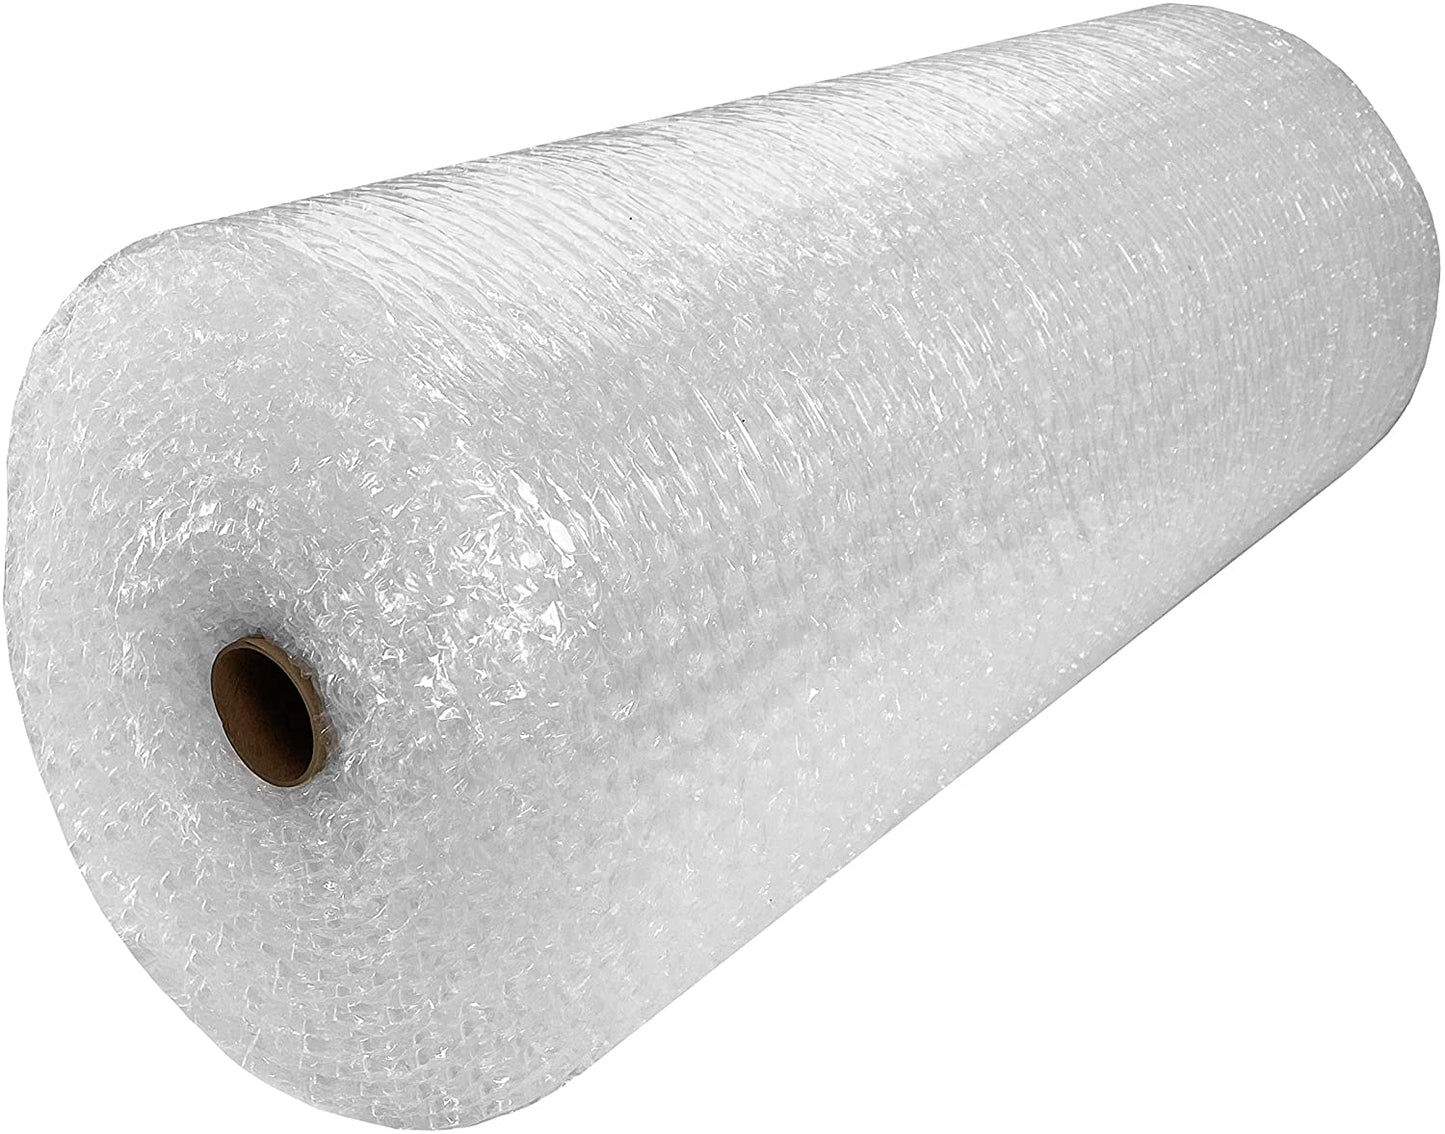 Bubble Roll - Small Bubble 4 x 12" x 500' - 12" Perforations